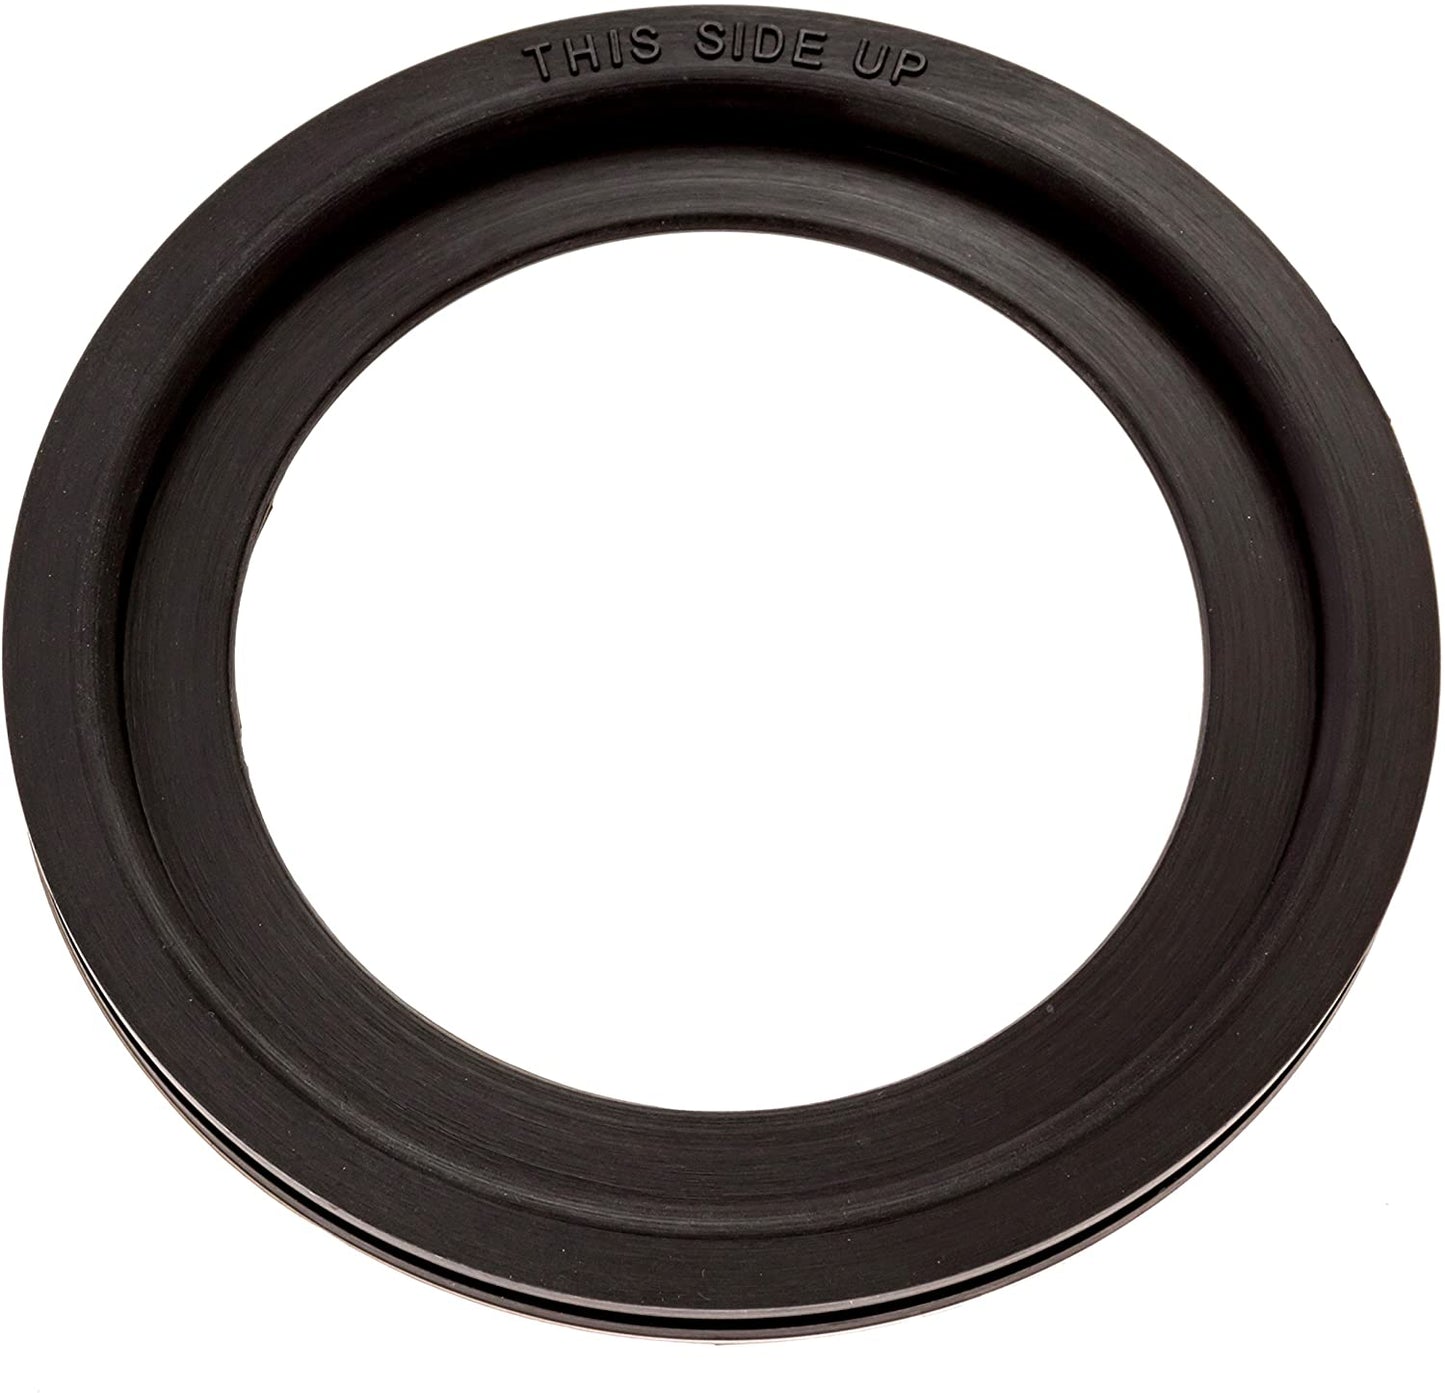 Flush Ball Seal for 300 310 320 RV Toilets Replace 385311658 Kit Ideal Replacement Gasket